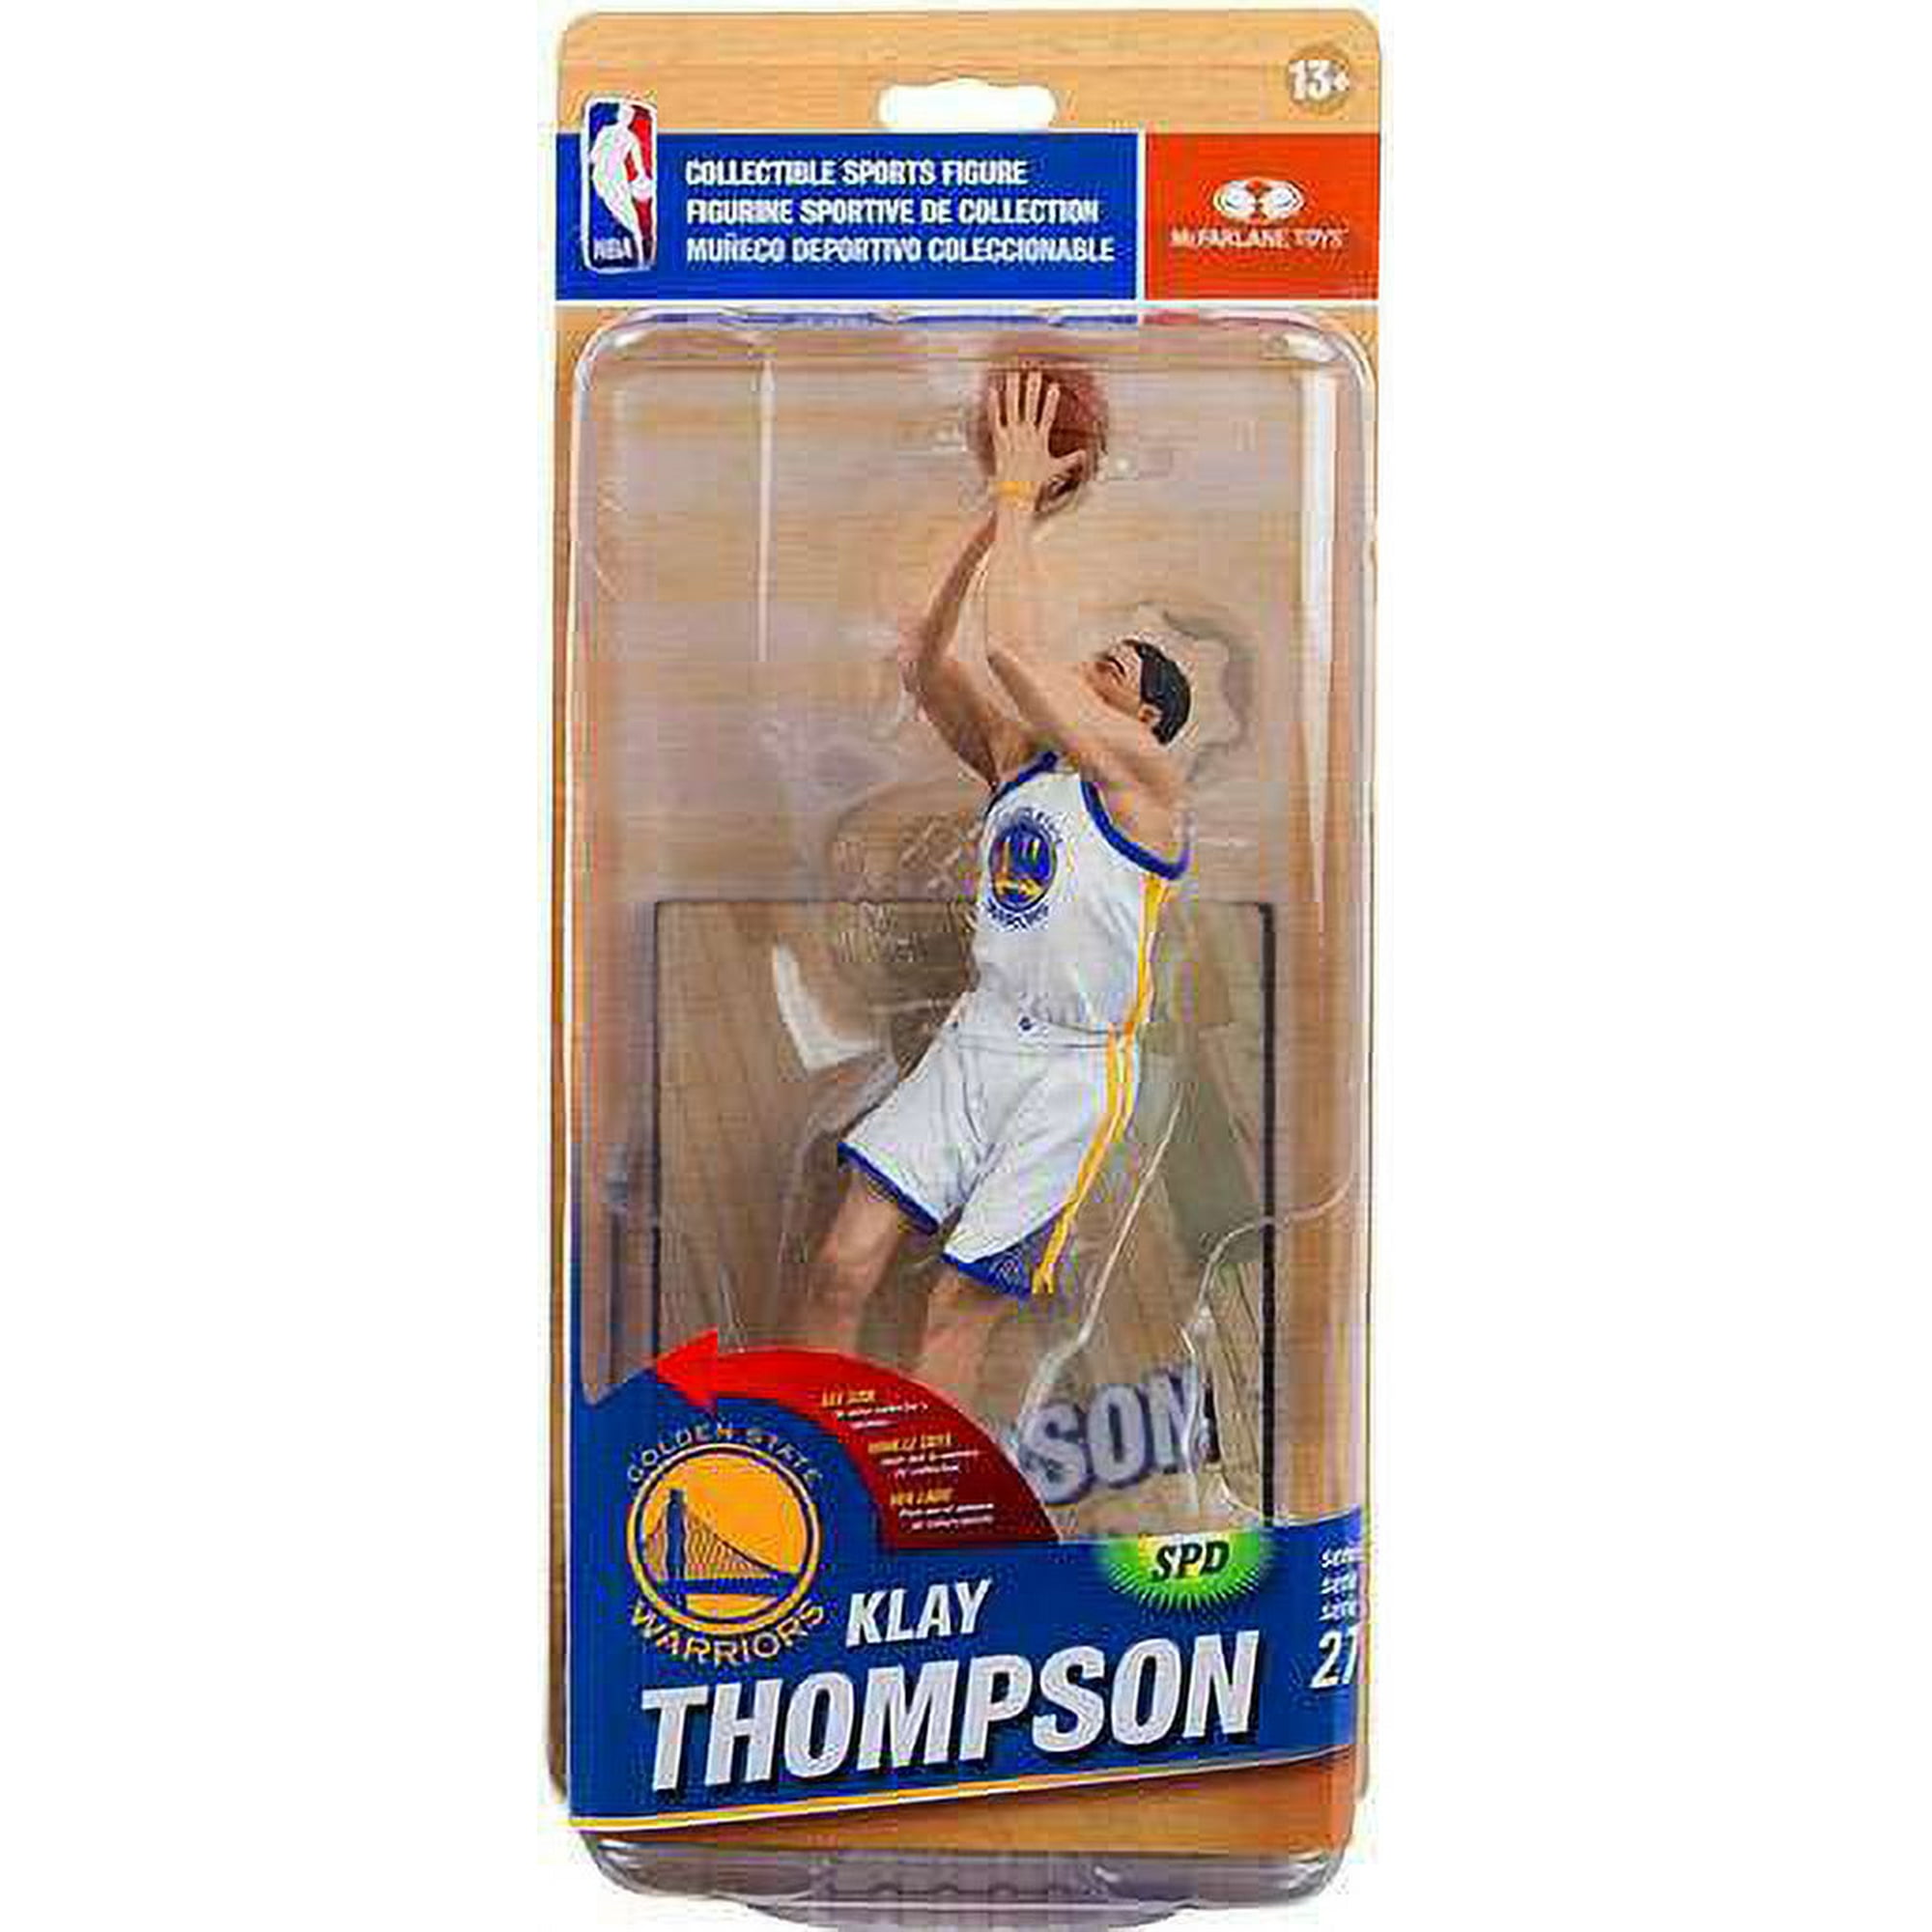 Klay Thompson All Star Gifts & Merchandise for Sale